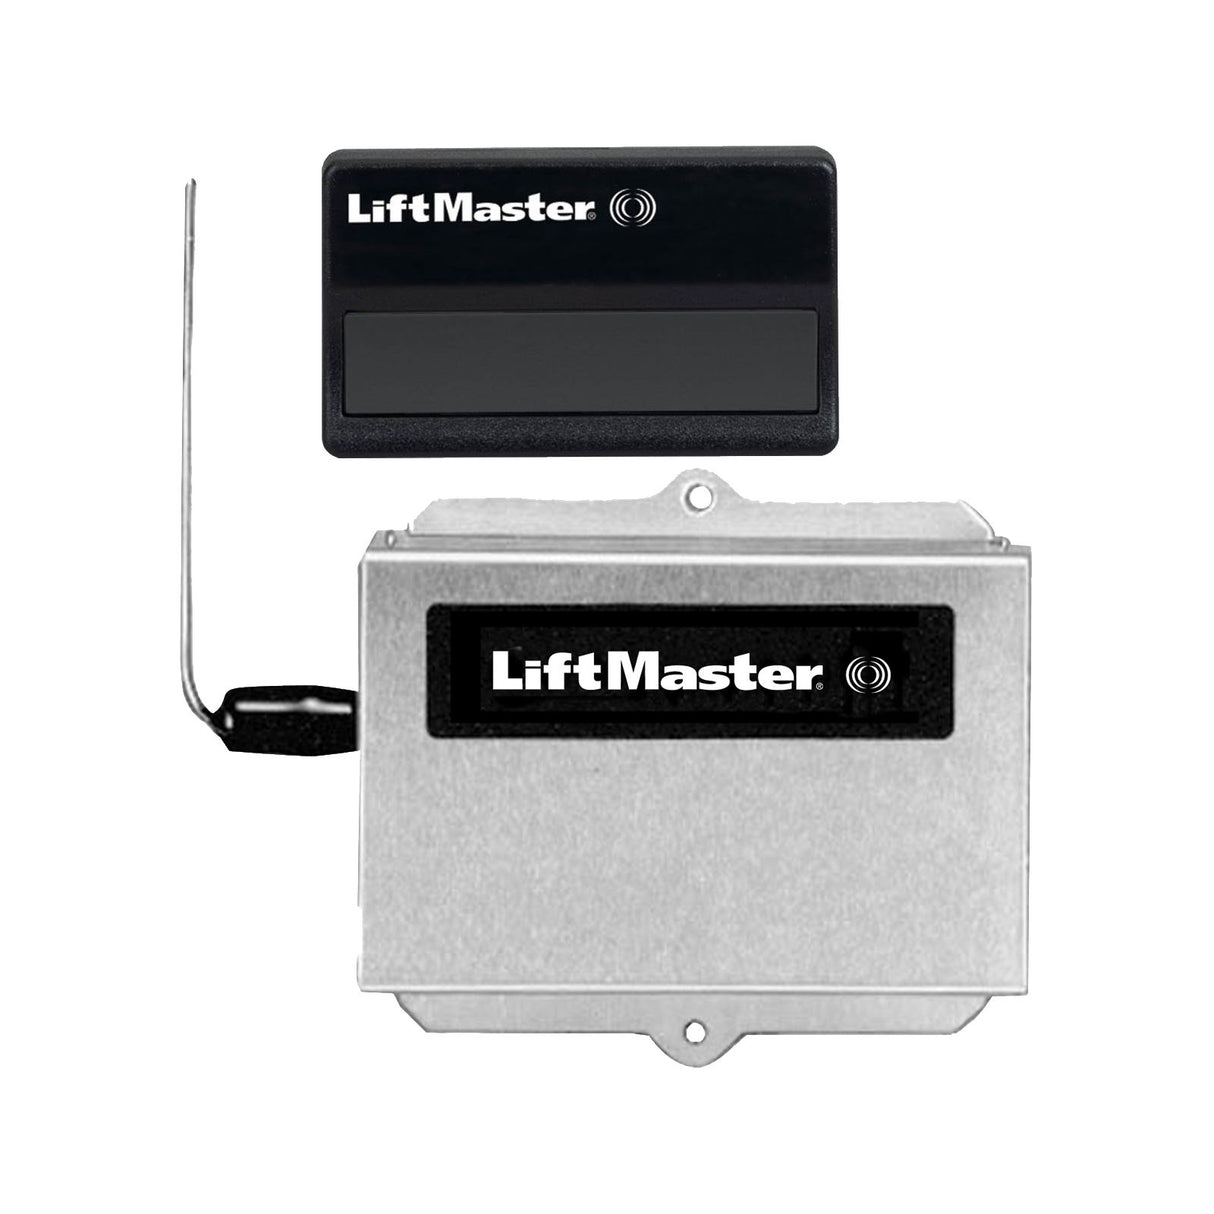 Liftmaster 315Mhz Receiver and 1 Remote Combo